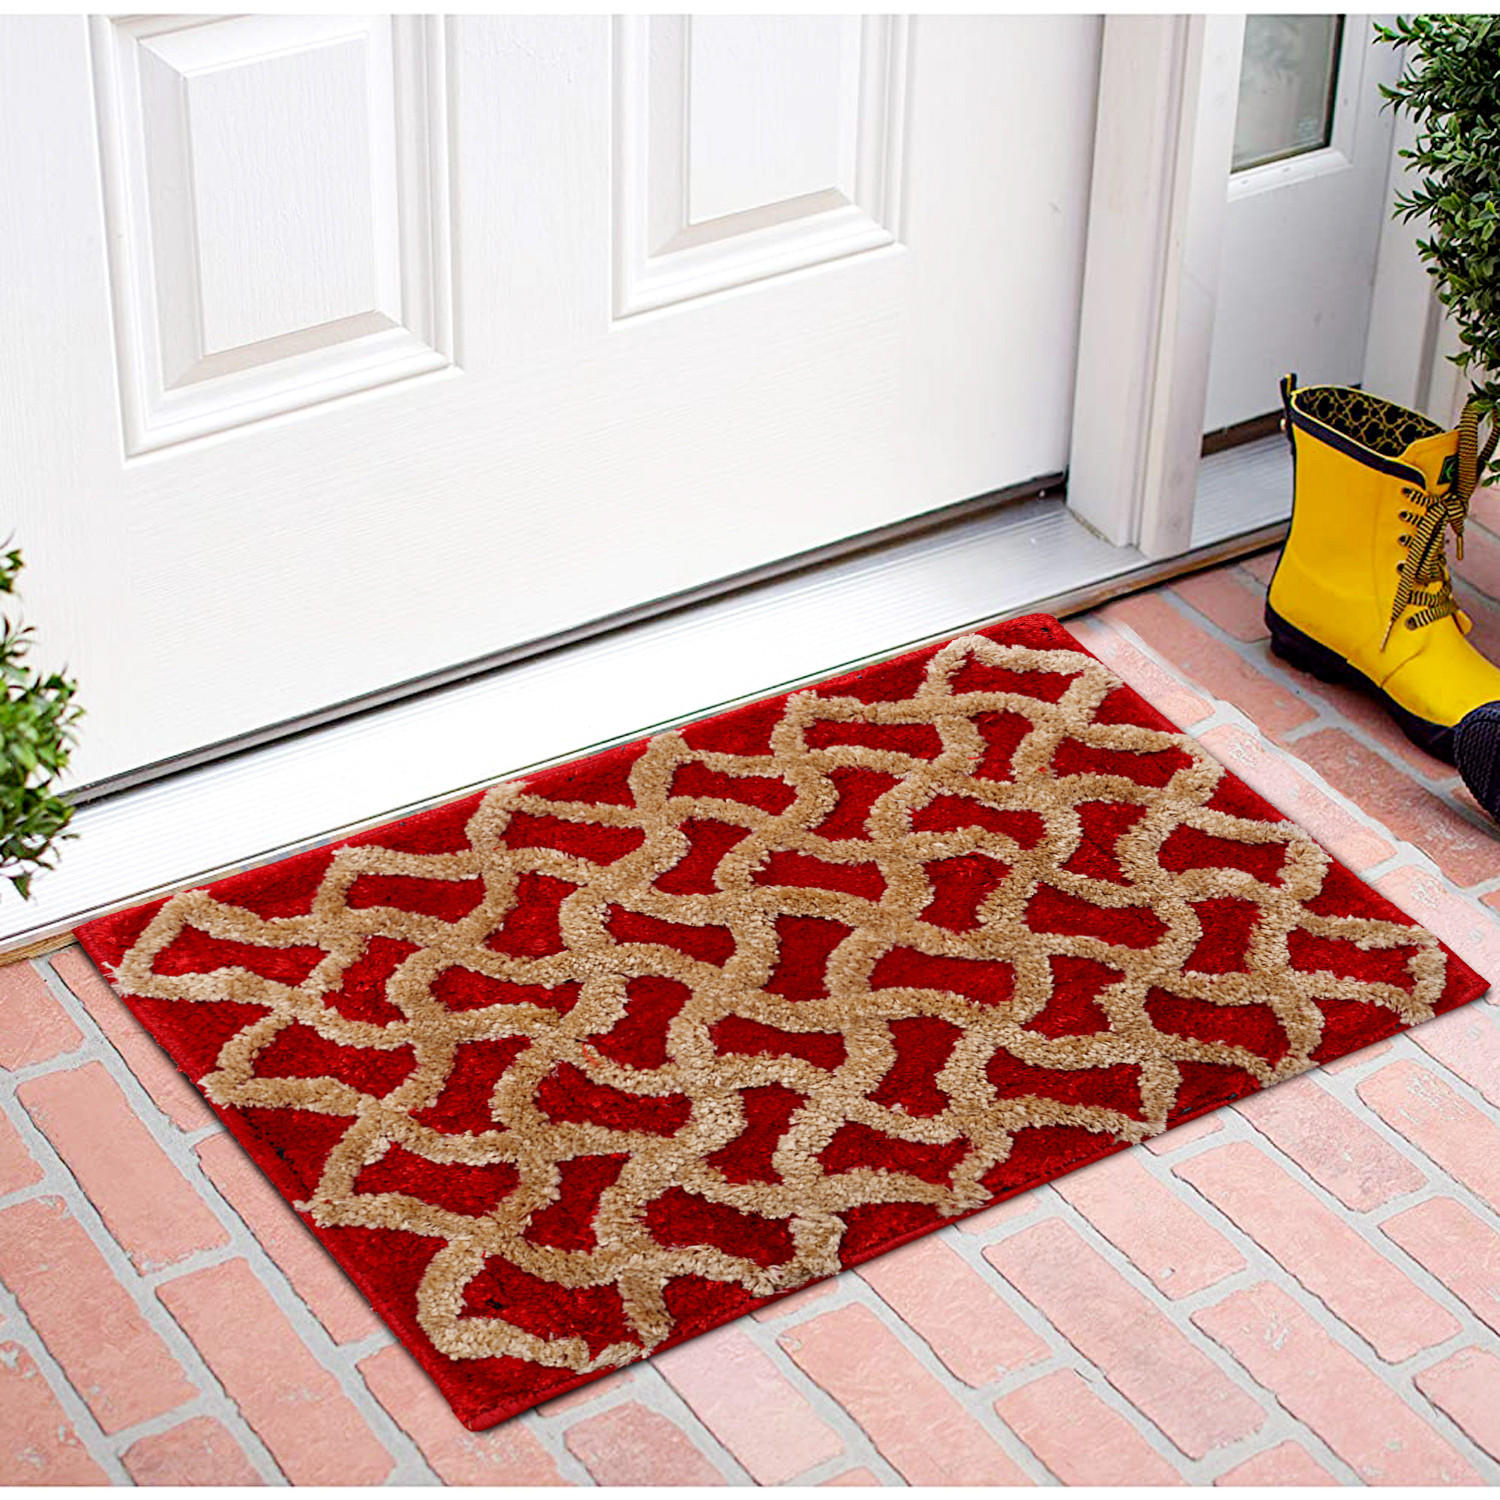 Kuber Industries Soft, lightweigth, Washable, Non Slip Doormat Entrance Rug Dirt Trapper Mat Shoes Scraper for Entry, Patio, Porch- Pack of 2 (Dark Brown & Red)